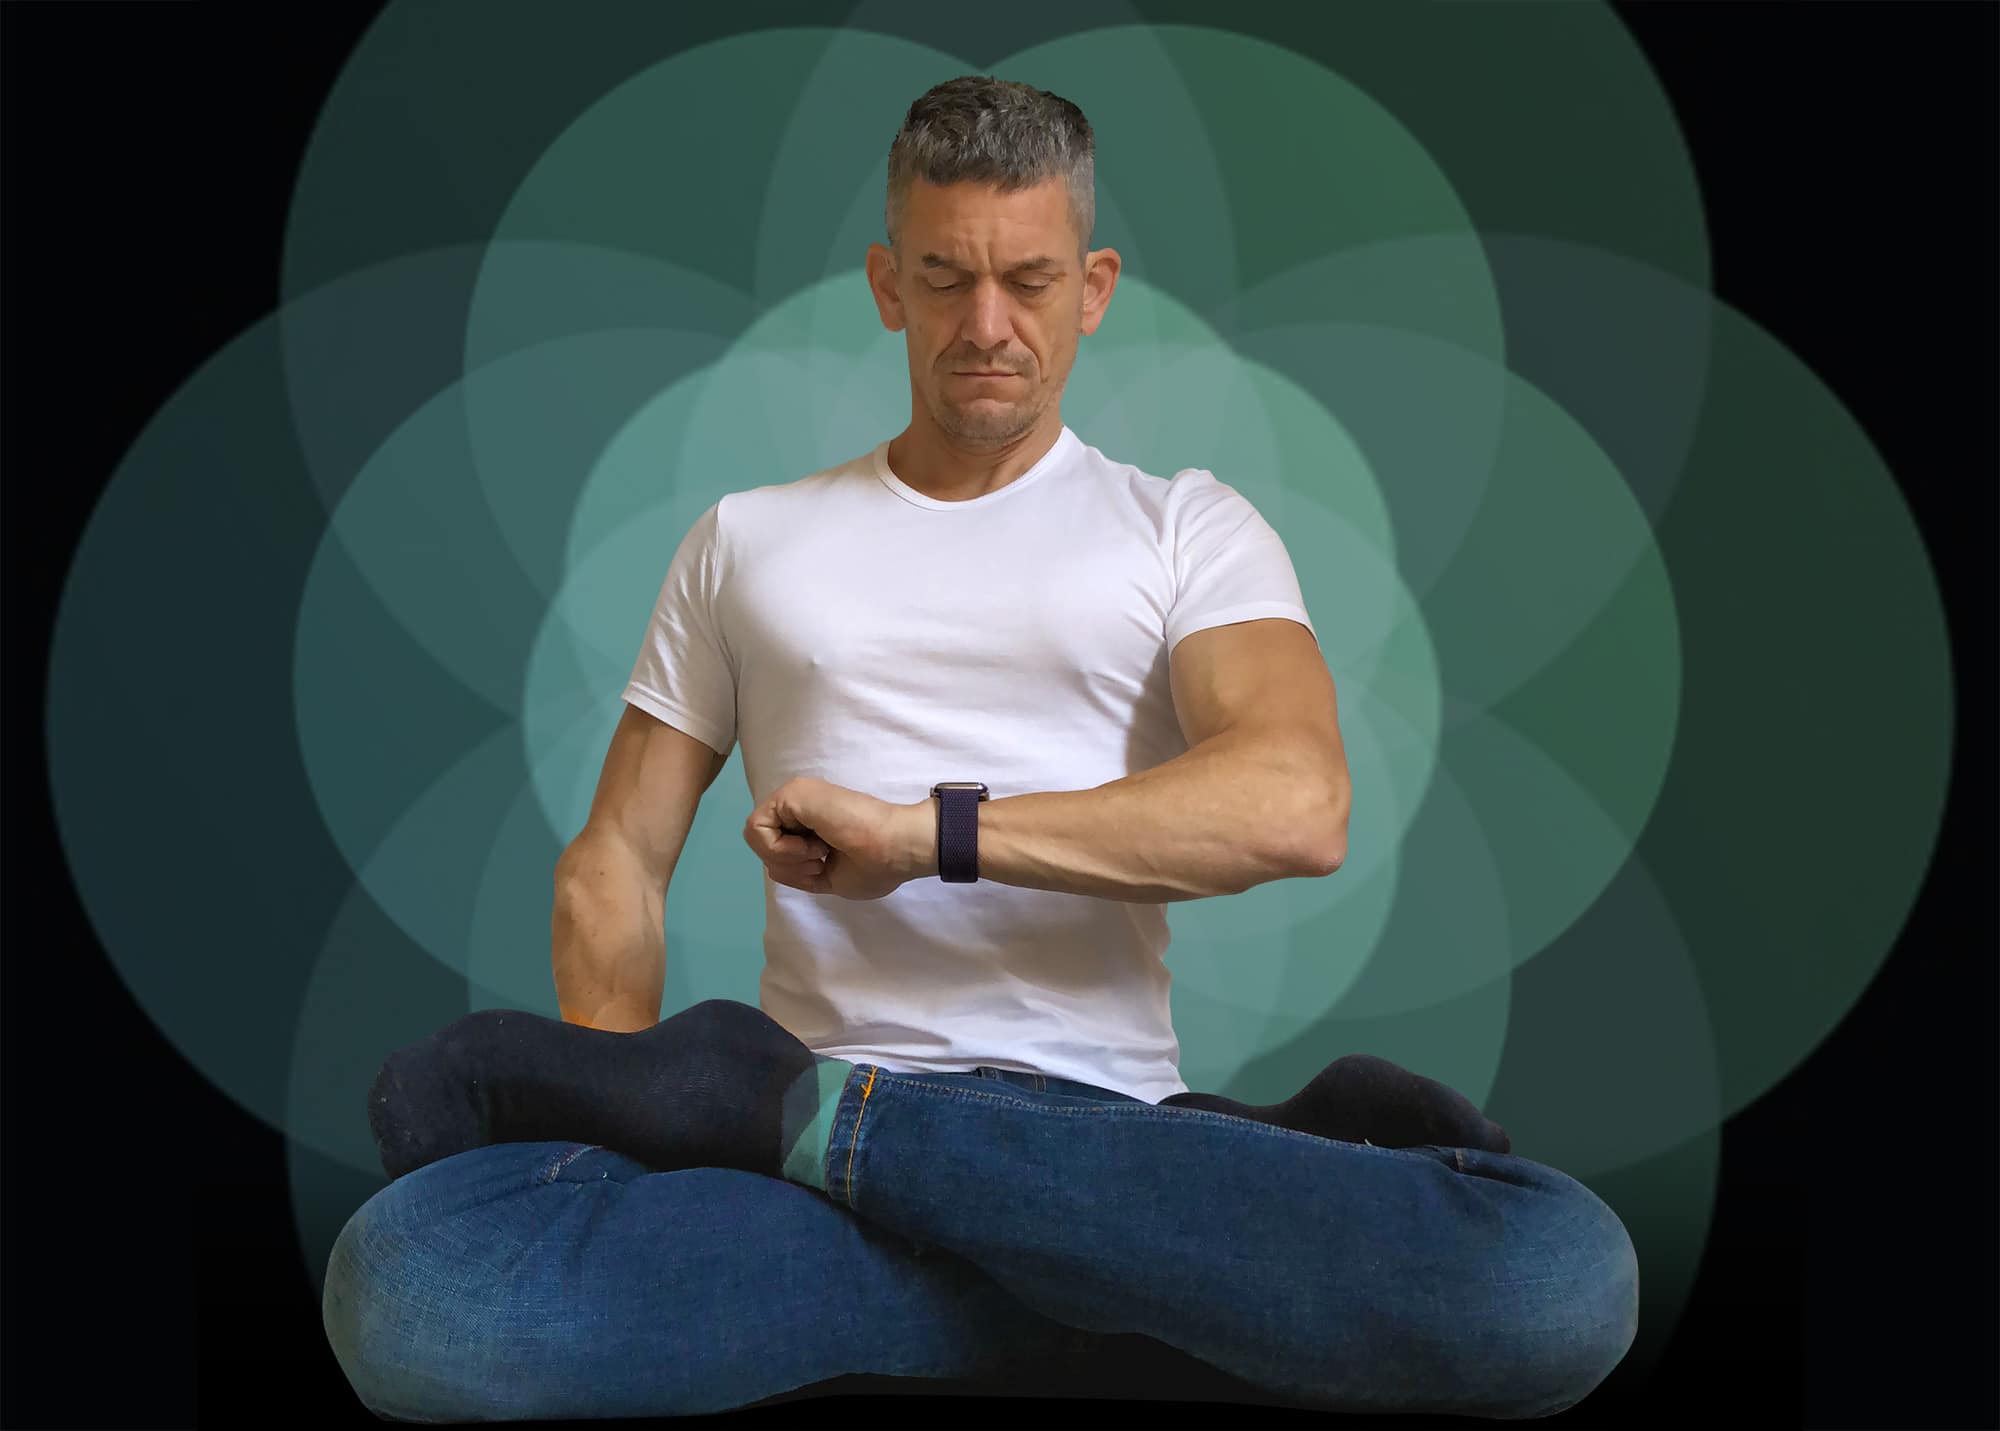 Chill out with the Apple Watch Breathe app.